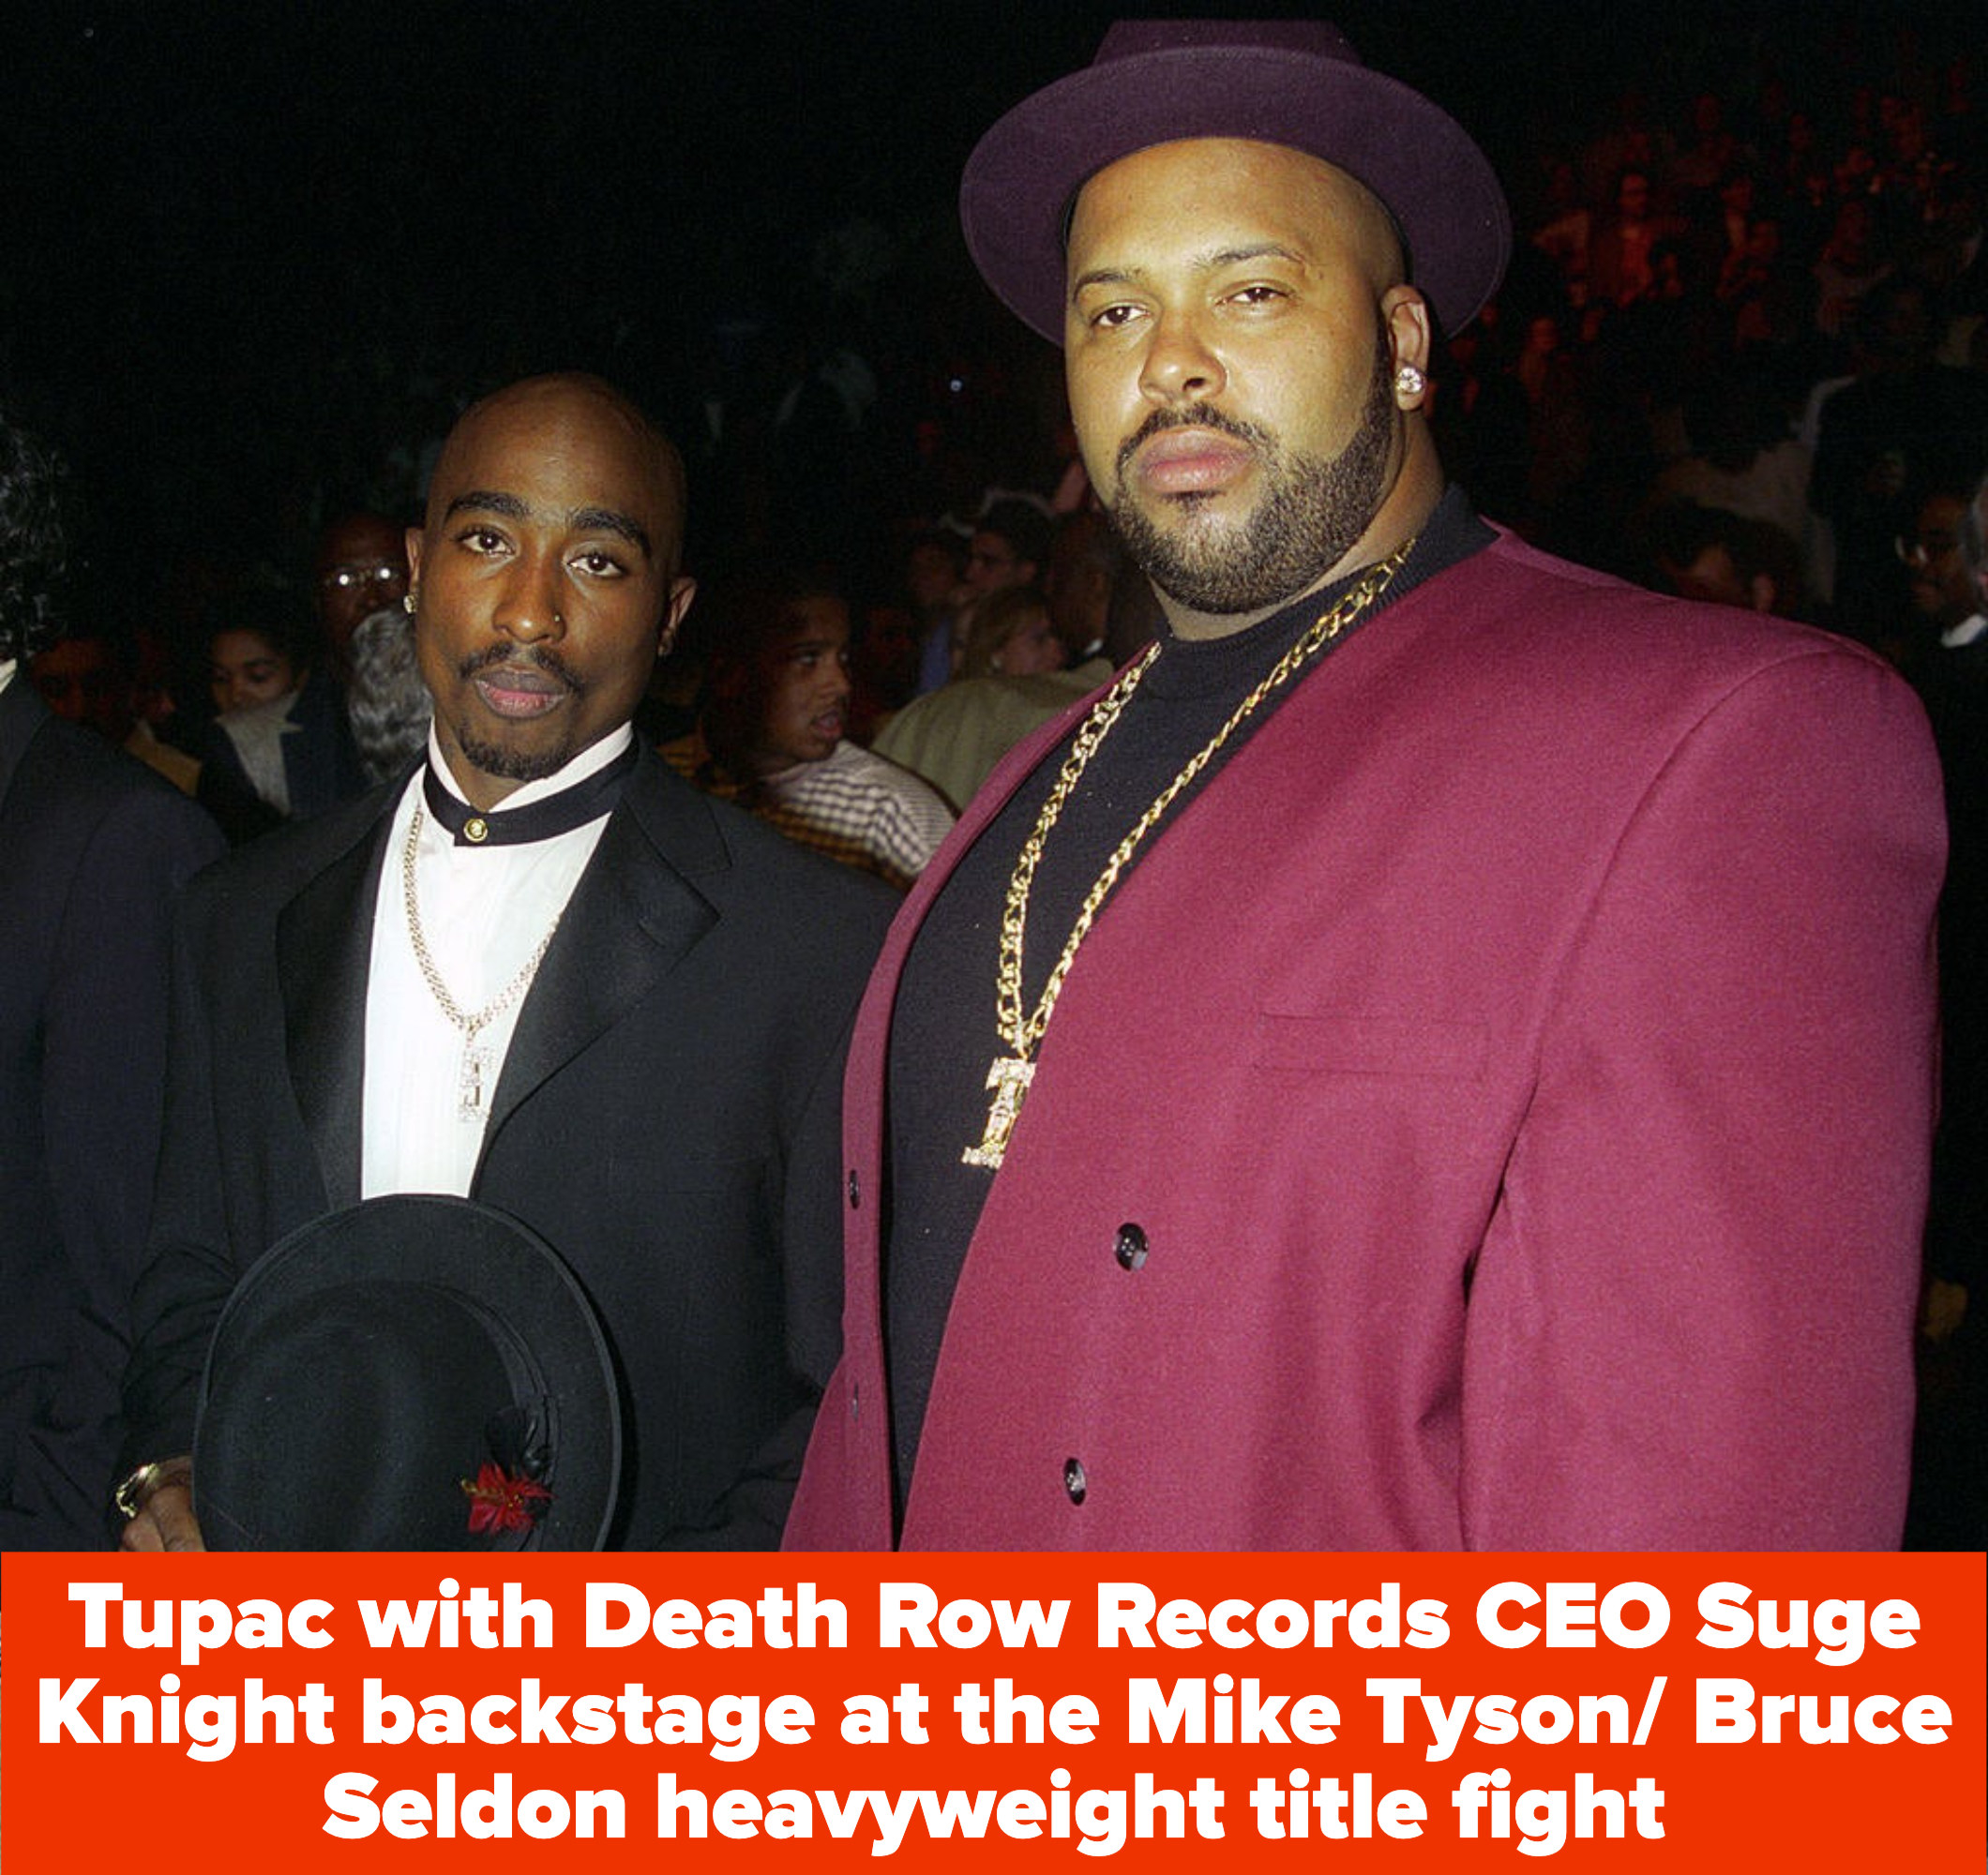 Tupac with Death Row Records CEO Suge Knight at the tyson fight